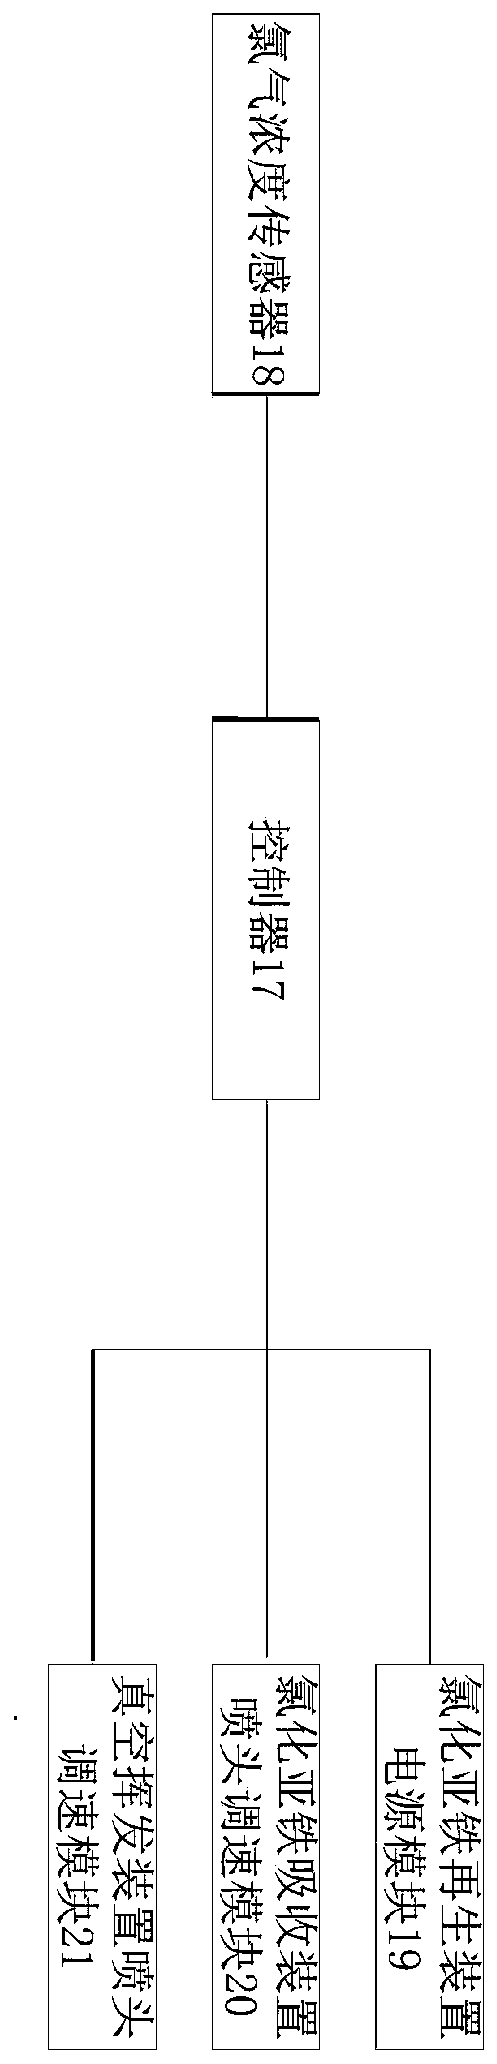 Chlorine treatment equipment of acidic etching solution recovery system, working method, control system and control method